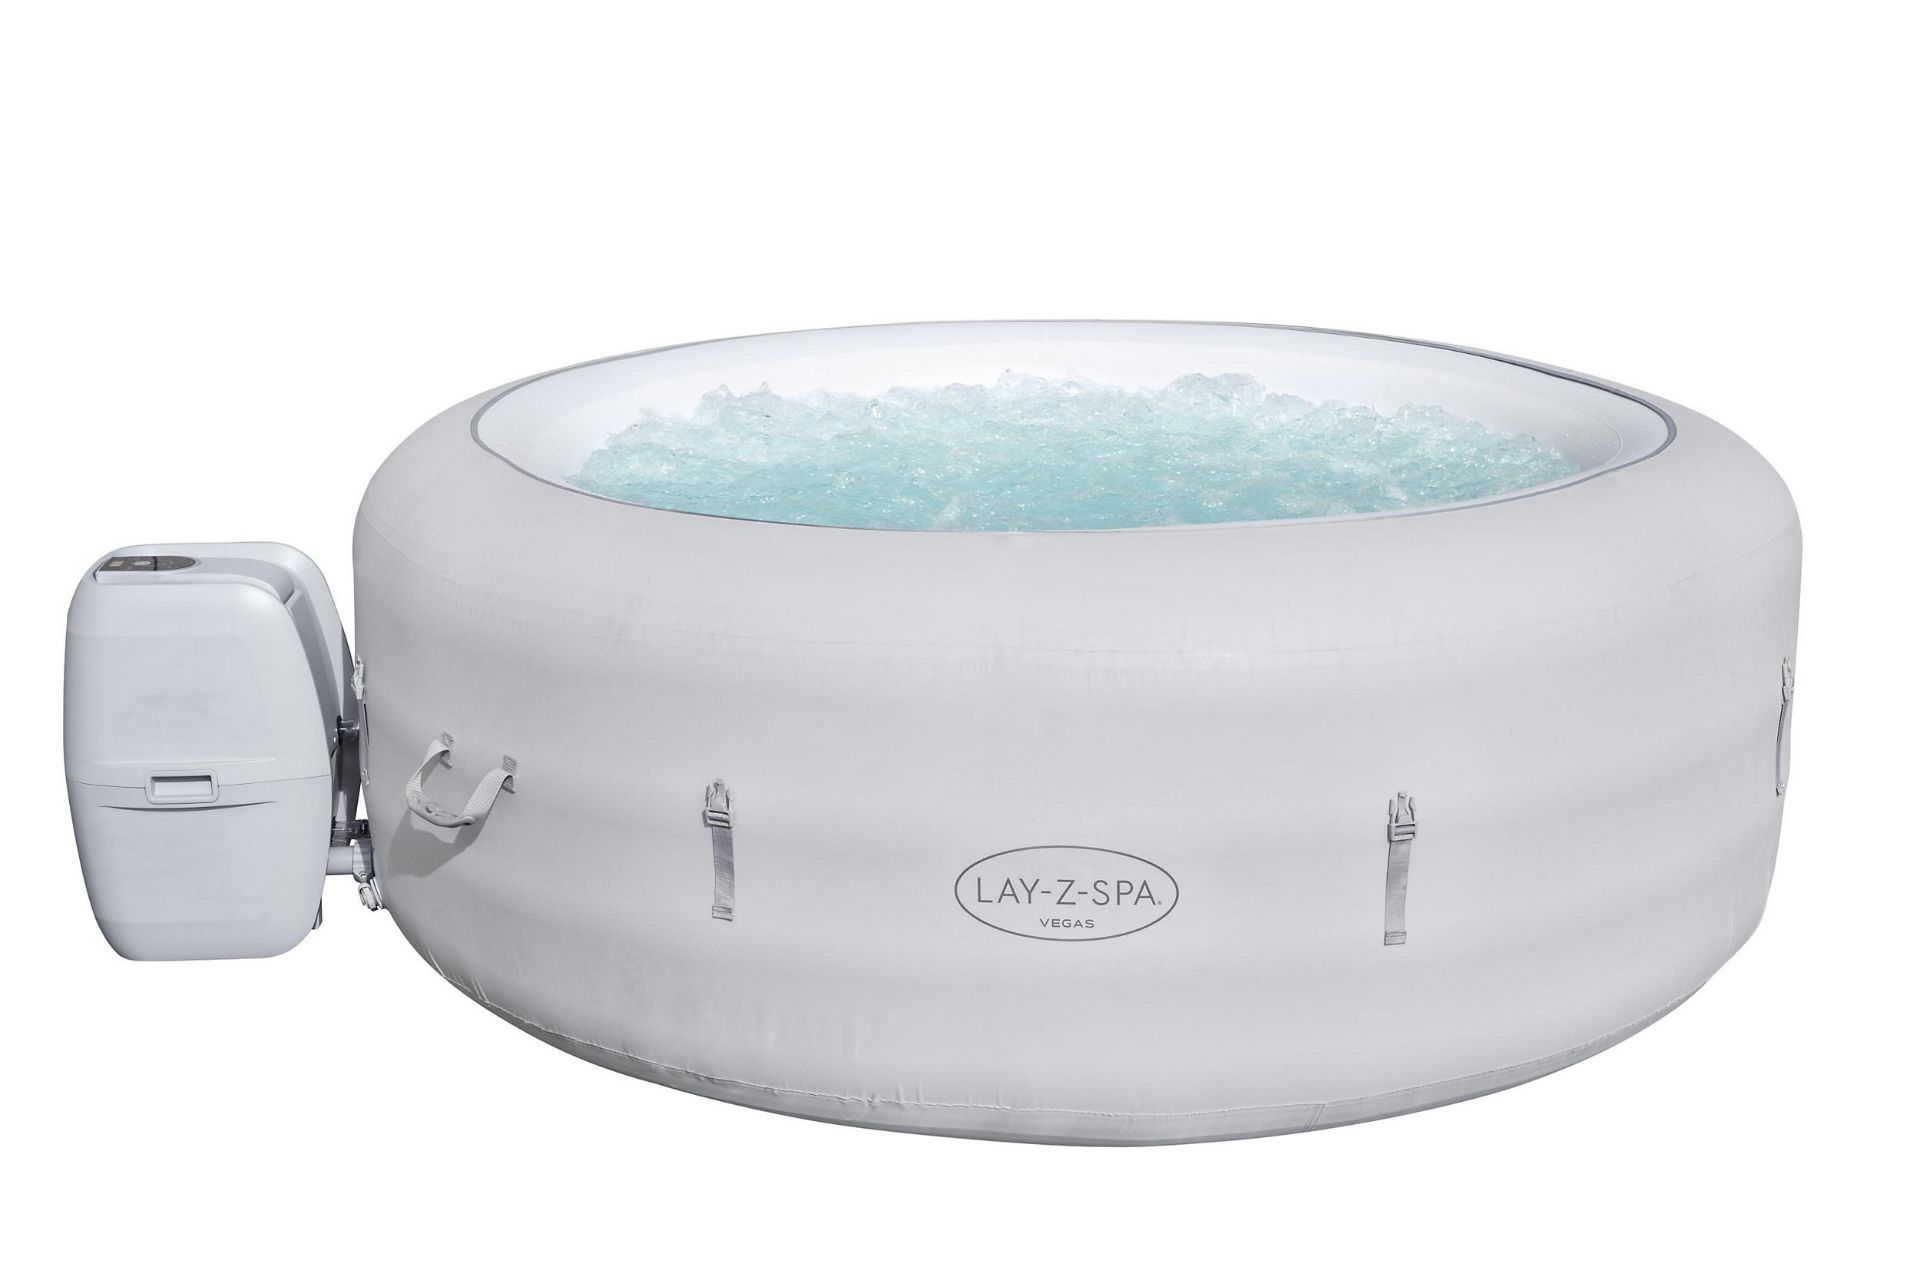 NEW & BOXED LAY-Z-SPA 6 PERSON VEGAS AIRJET. RRP £599 EACH. This popular Vegas AirJet™ is perfect